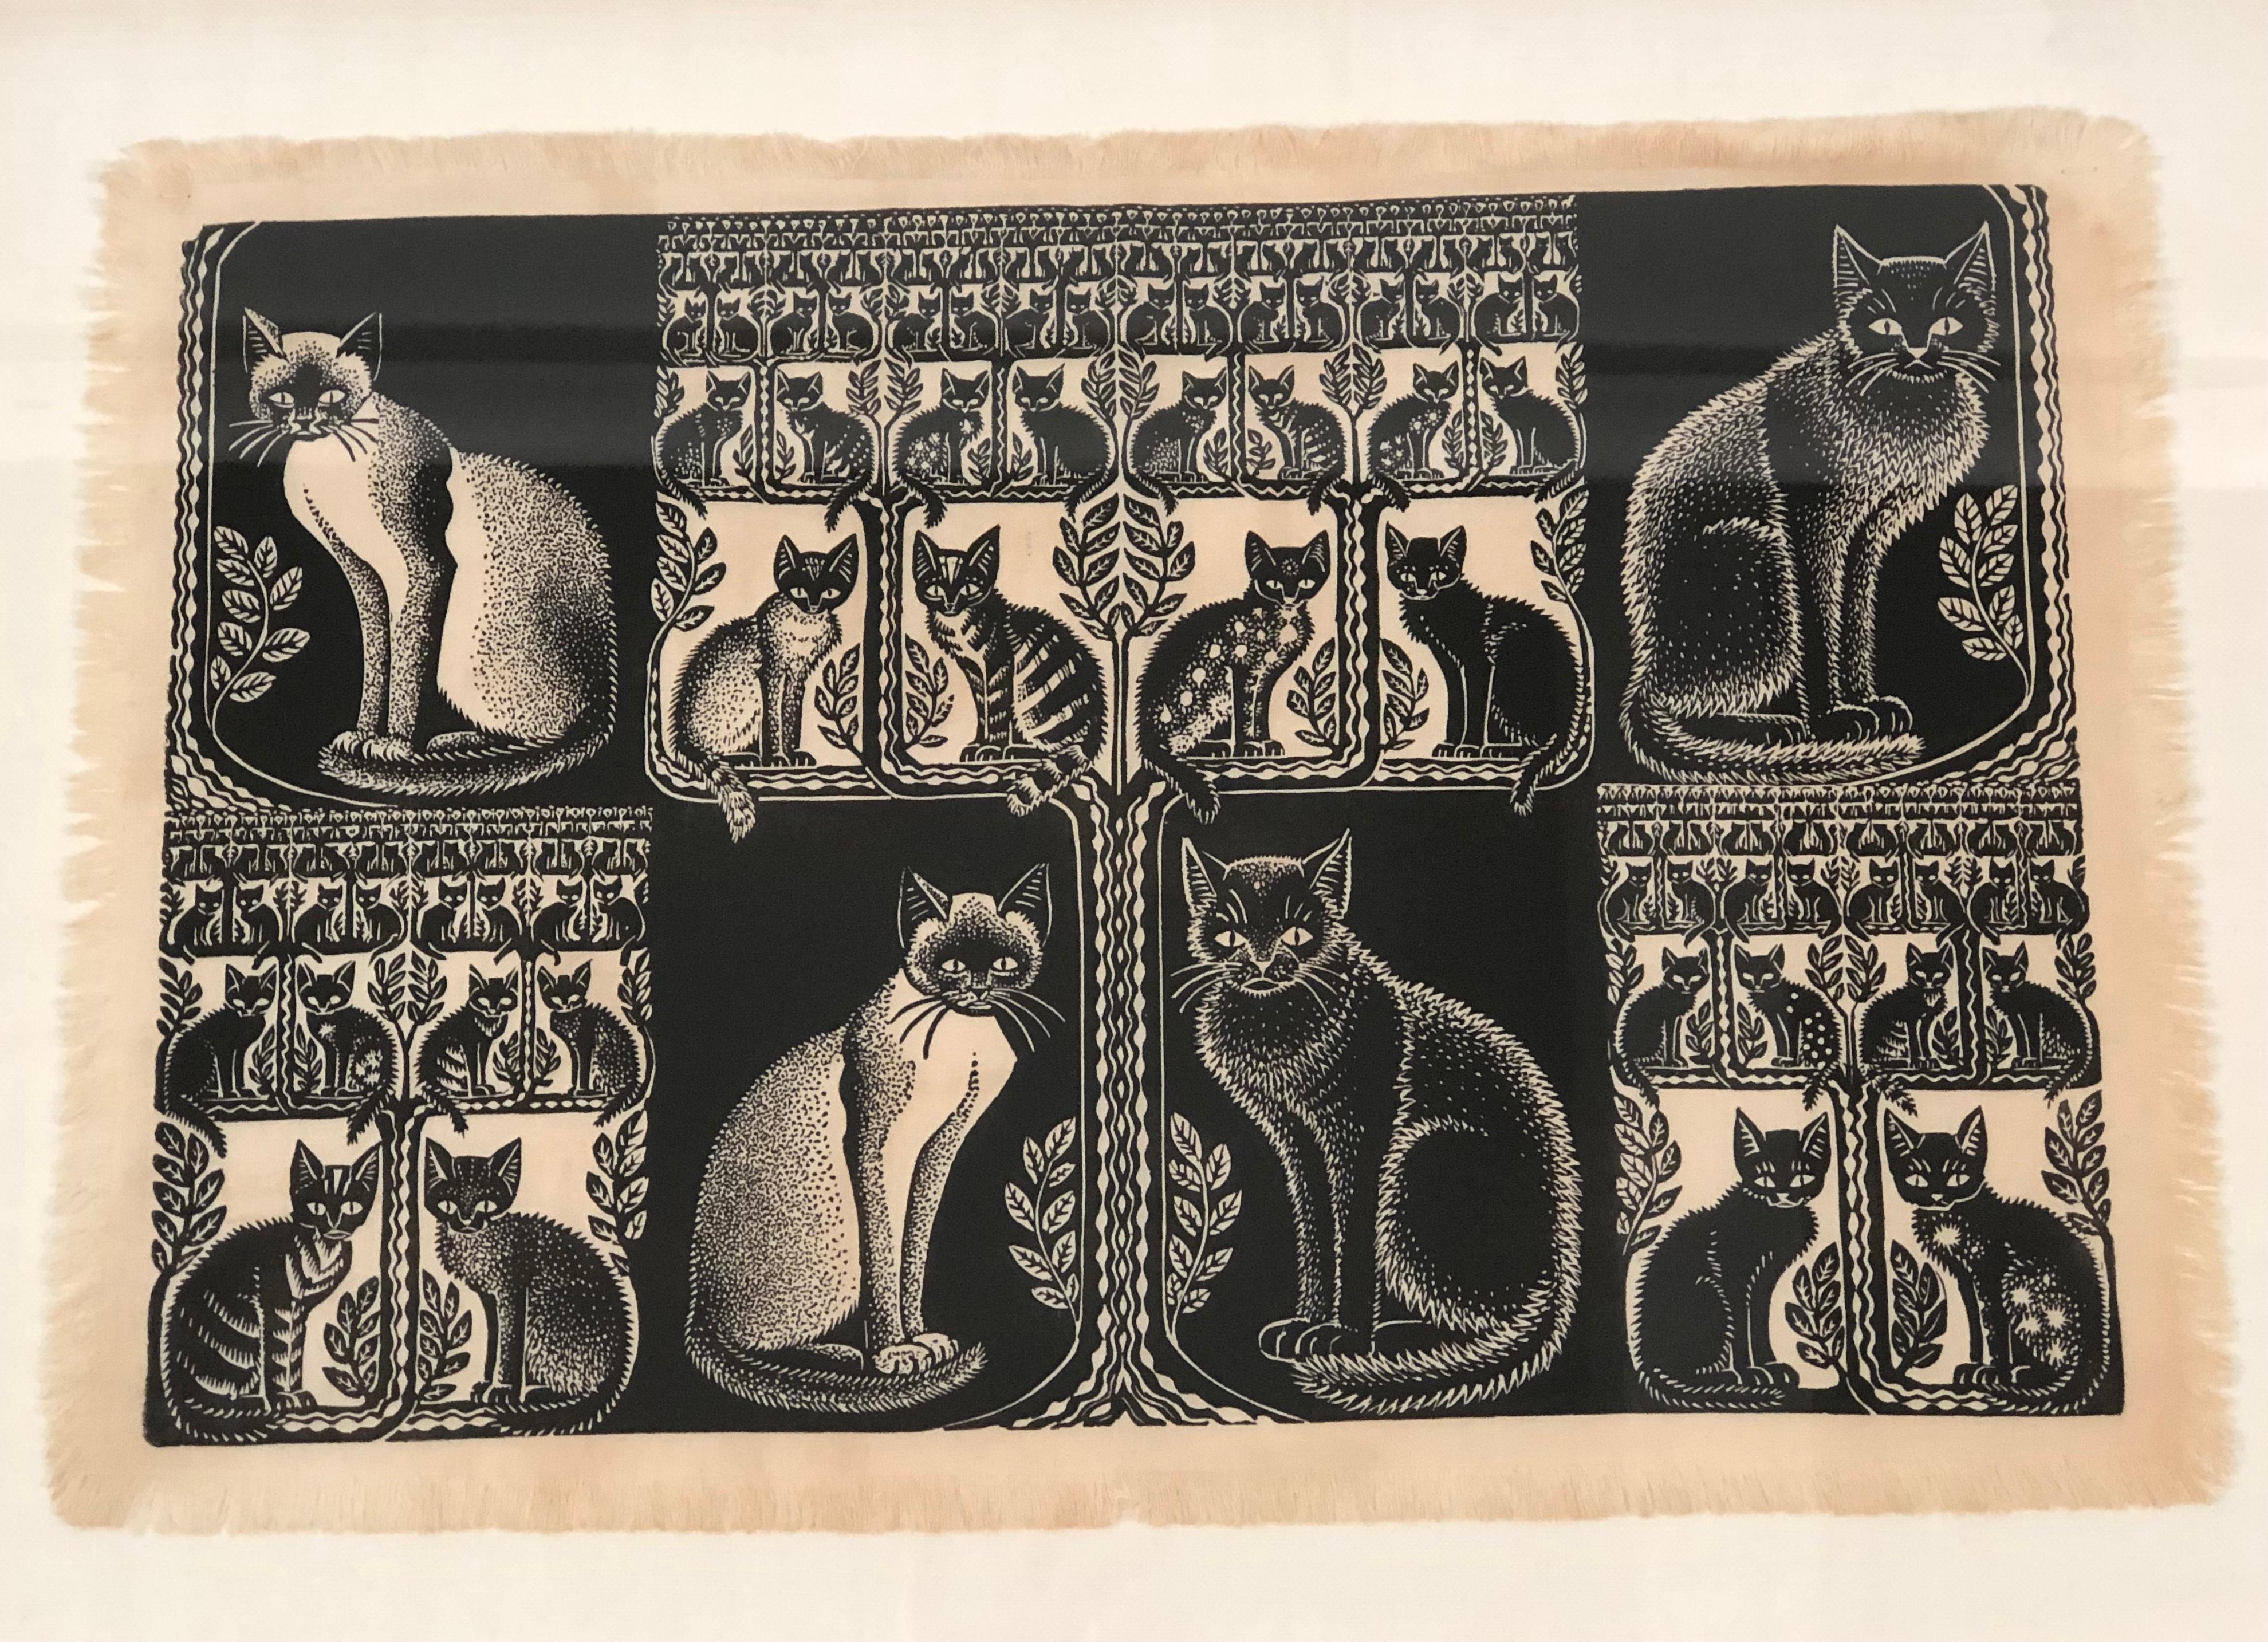 An original Folly Cove designers hand block printed textile, in the Zaidee and her kittens pattern designed by Virginia Lee Burton Demetrios, in black on cream colored linen., depicting an inventive and graphic composition featuring facing dark and